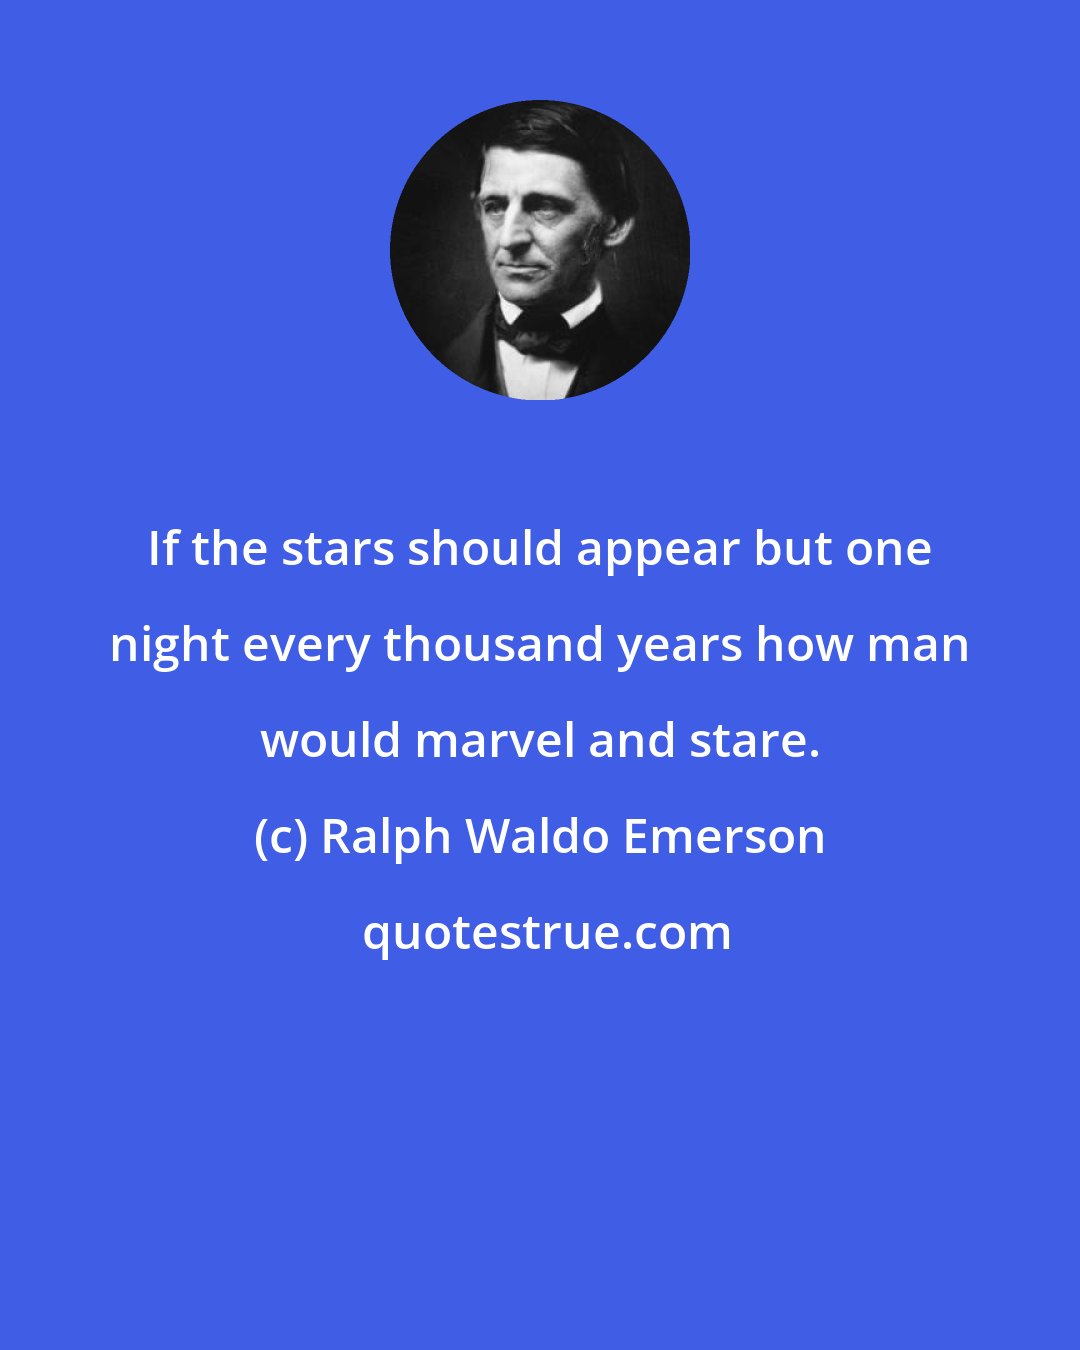 Ralph Waldo Emerson: If the stars should appear but one night every thousand years how man would marvel and stare.